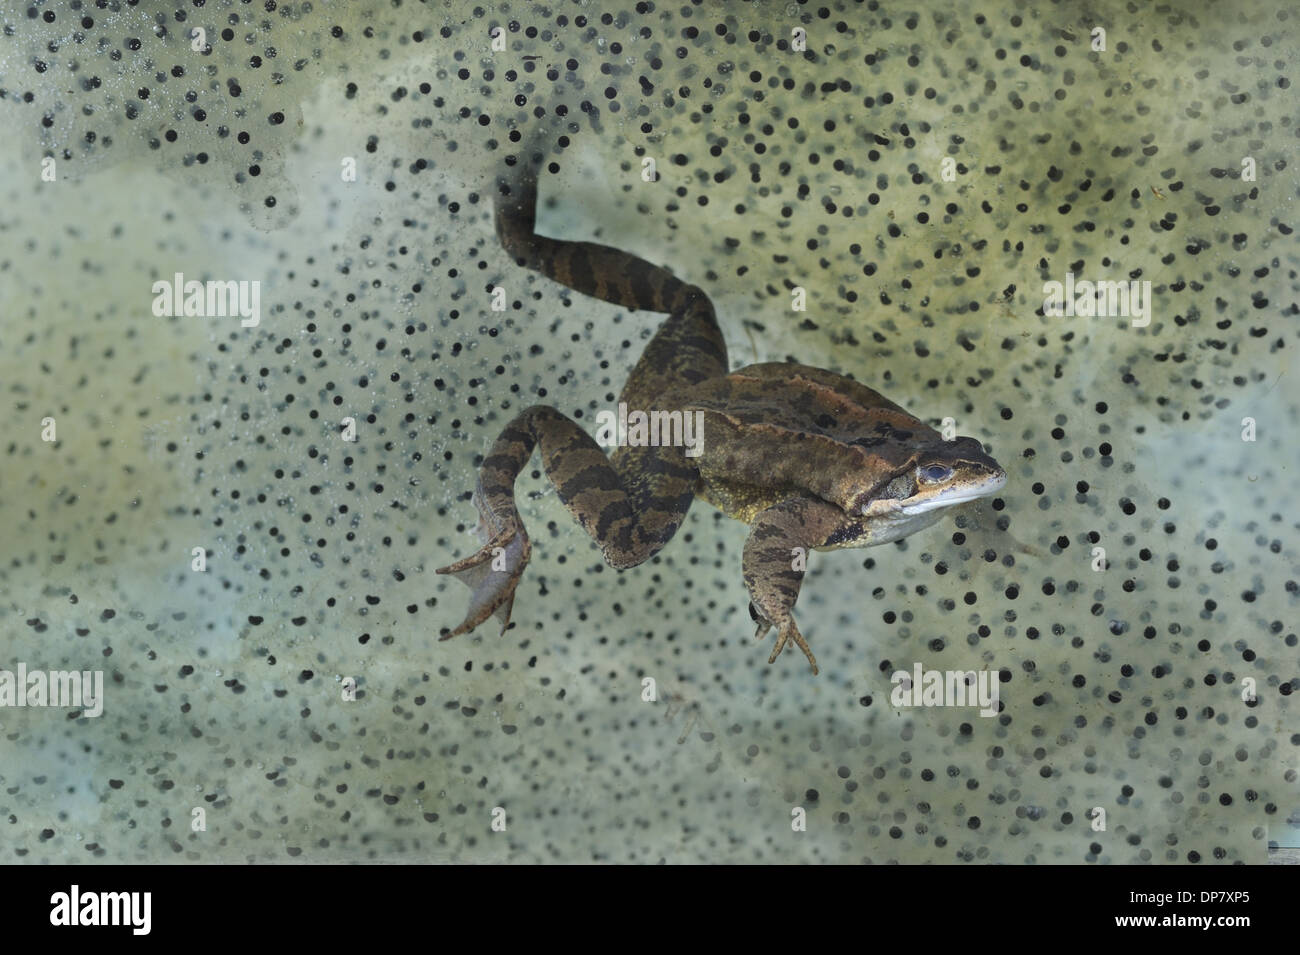 Common Frog (Rana temporaria) adult swimming underwater surrounded by frogspawn in garden pond Bentley Suffolk England April Stock Photo